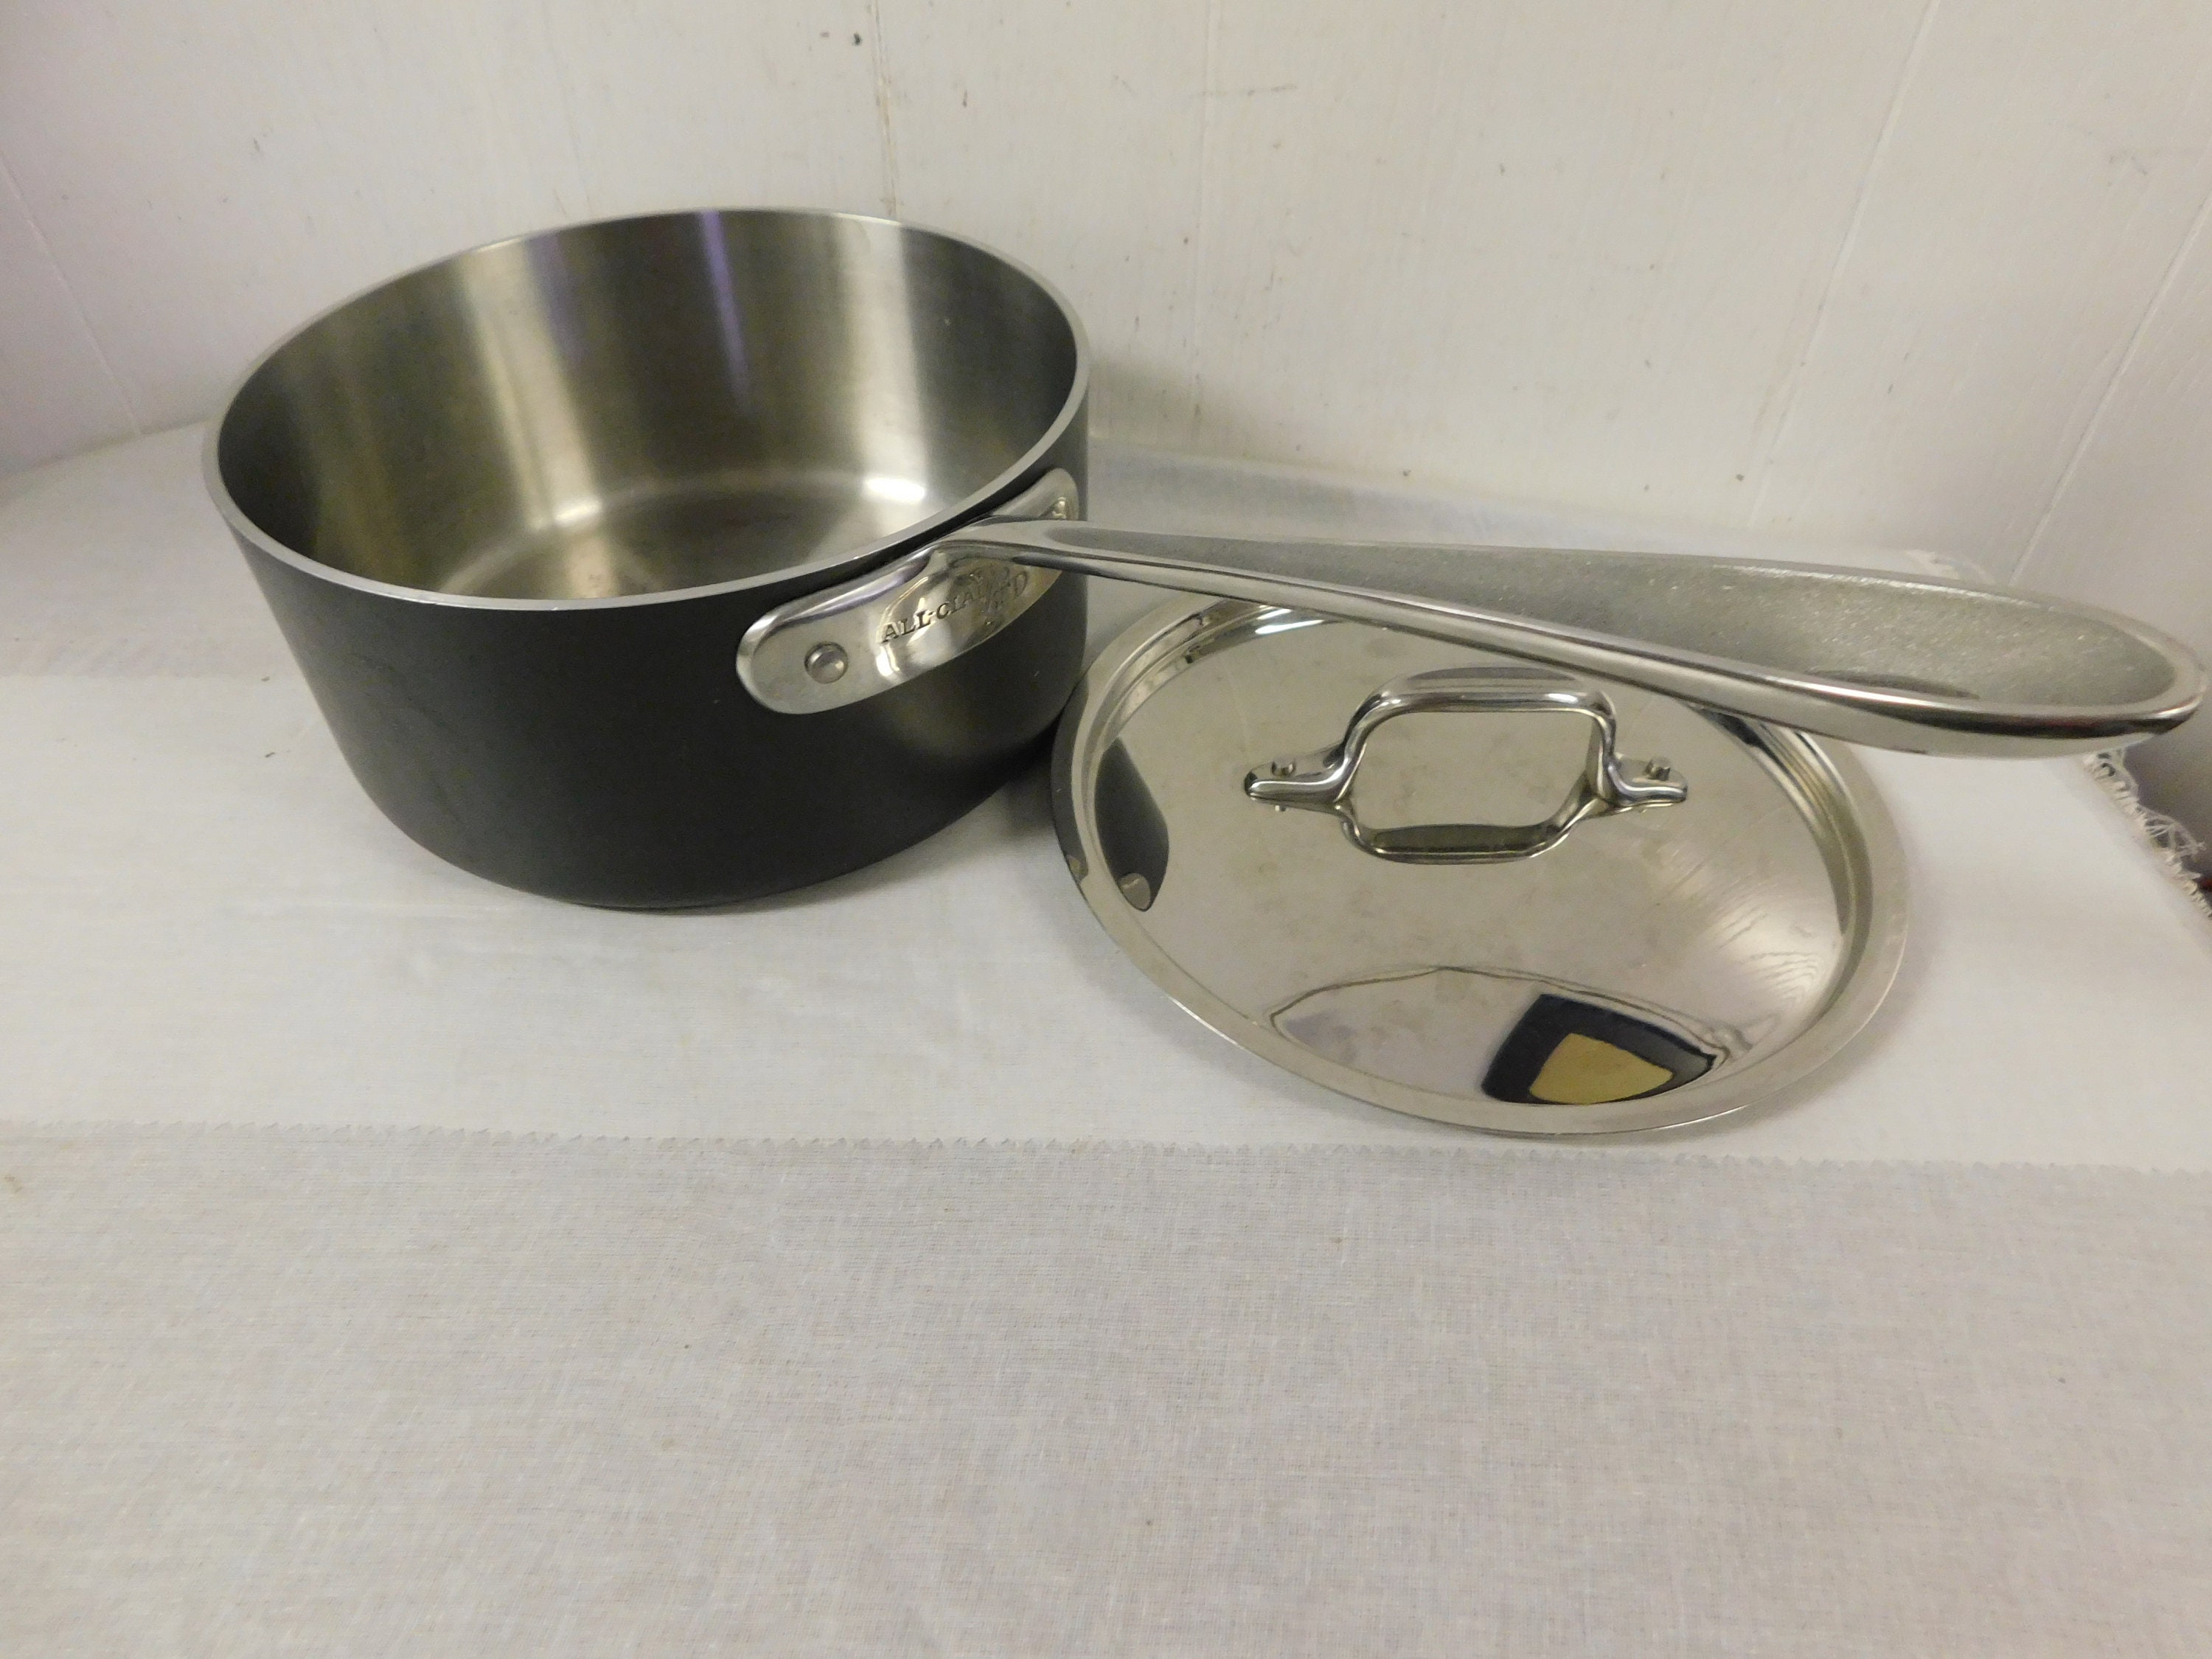 Vintage All-Clad LTD Anodized Stainless Steel Aluminum Core 10.5 Skillet  Fry Pan